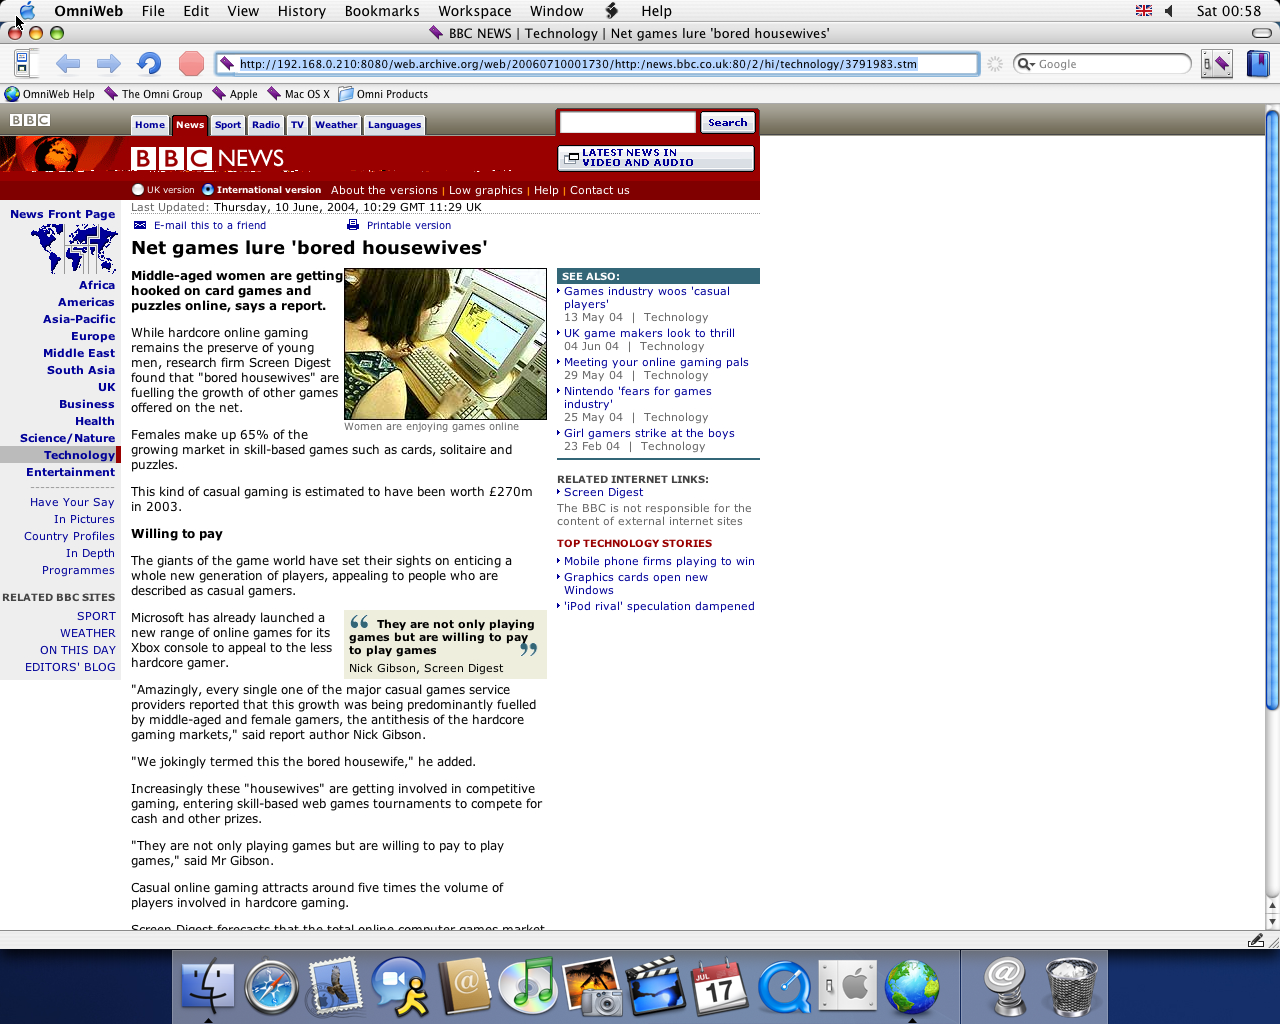 OS X 10.3 PPC with Omniweb 5.0 displaying a page from BBC News archived at July 10, 2006 at 00:17:30